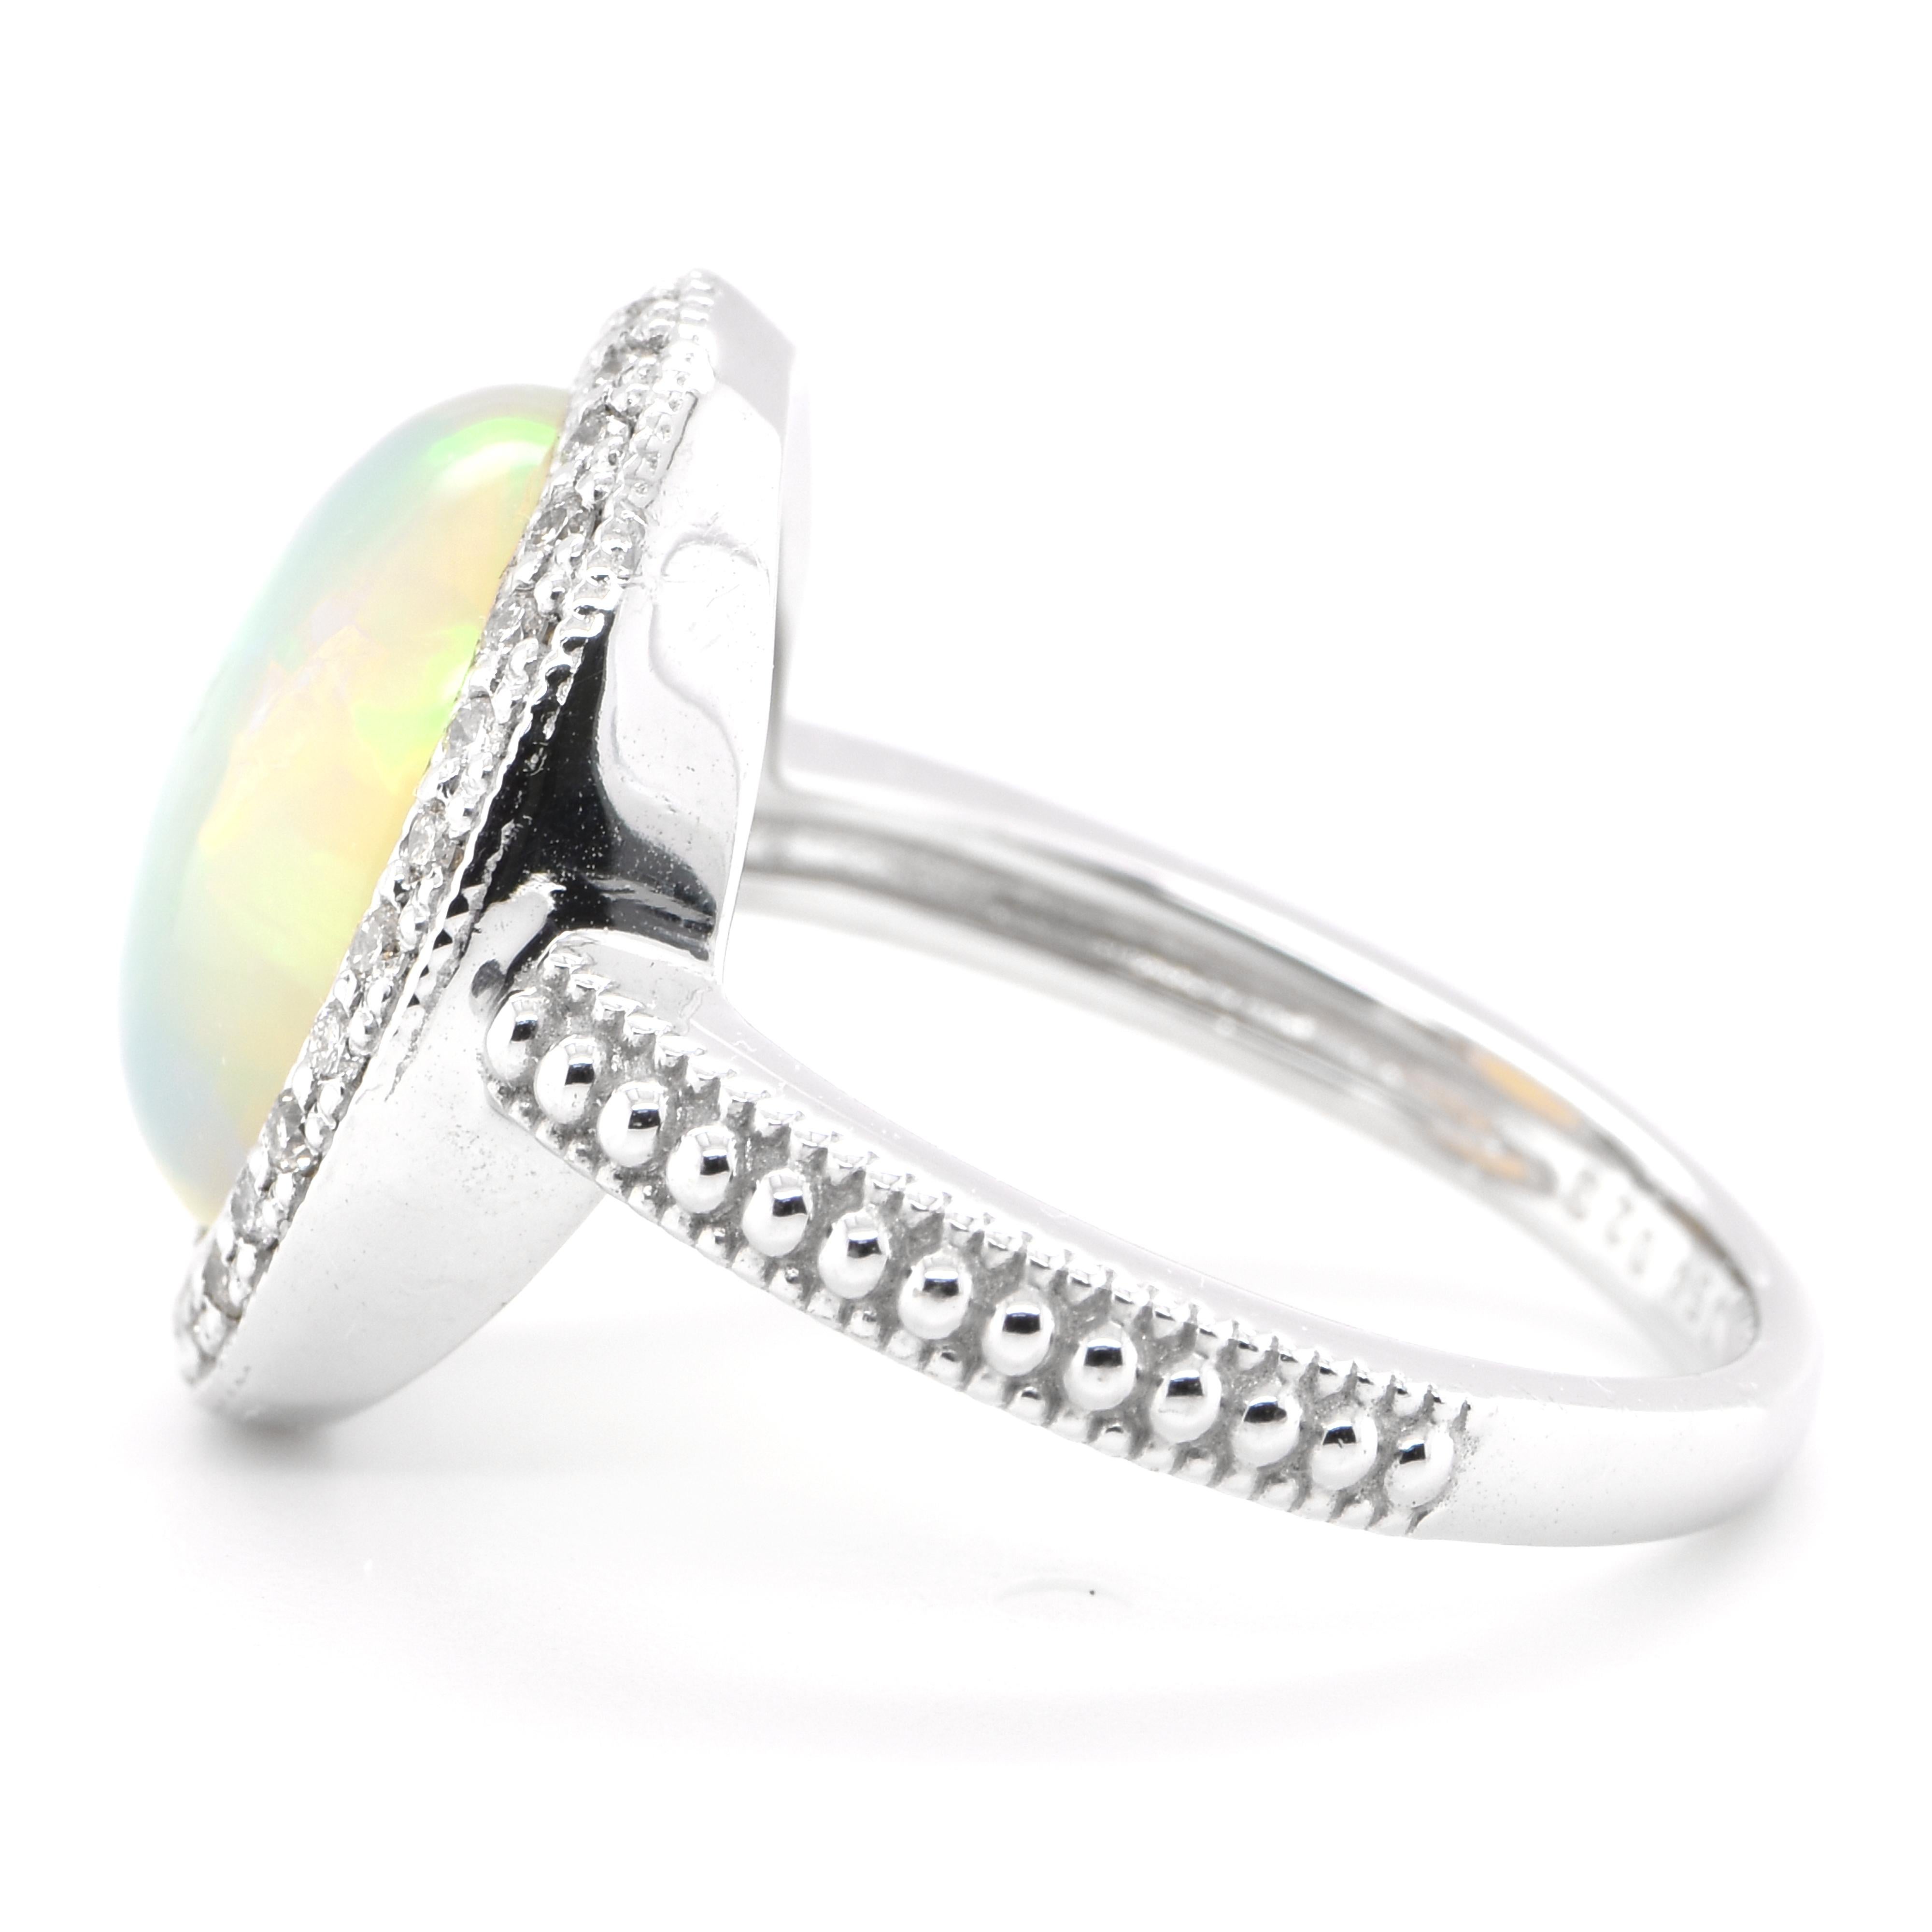 Cabochon 3.54 Carat Natural White Opal and Diamond Vintage Ring Set in 18K White Gold